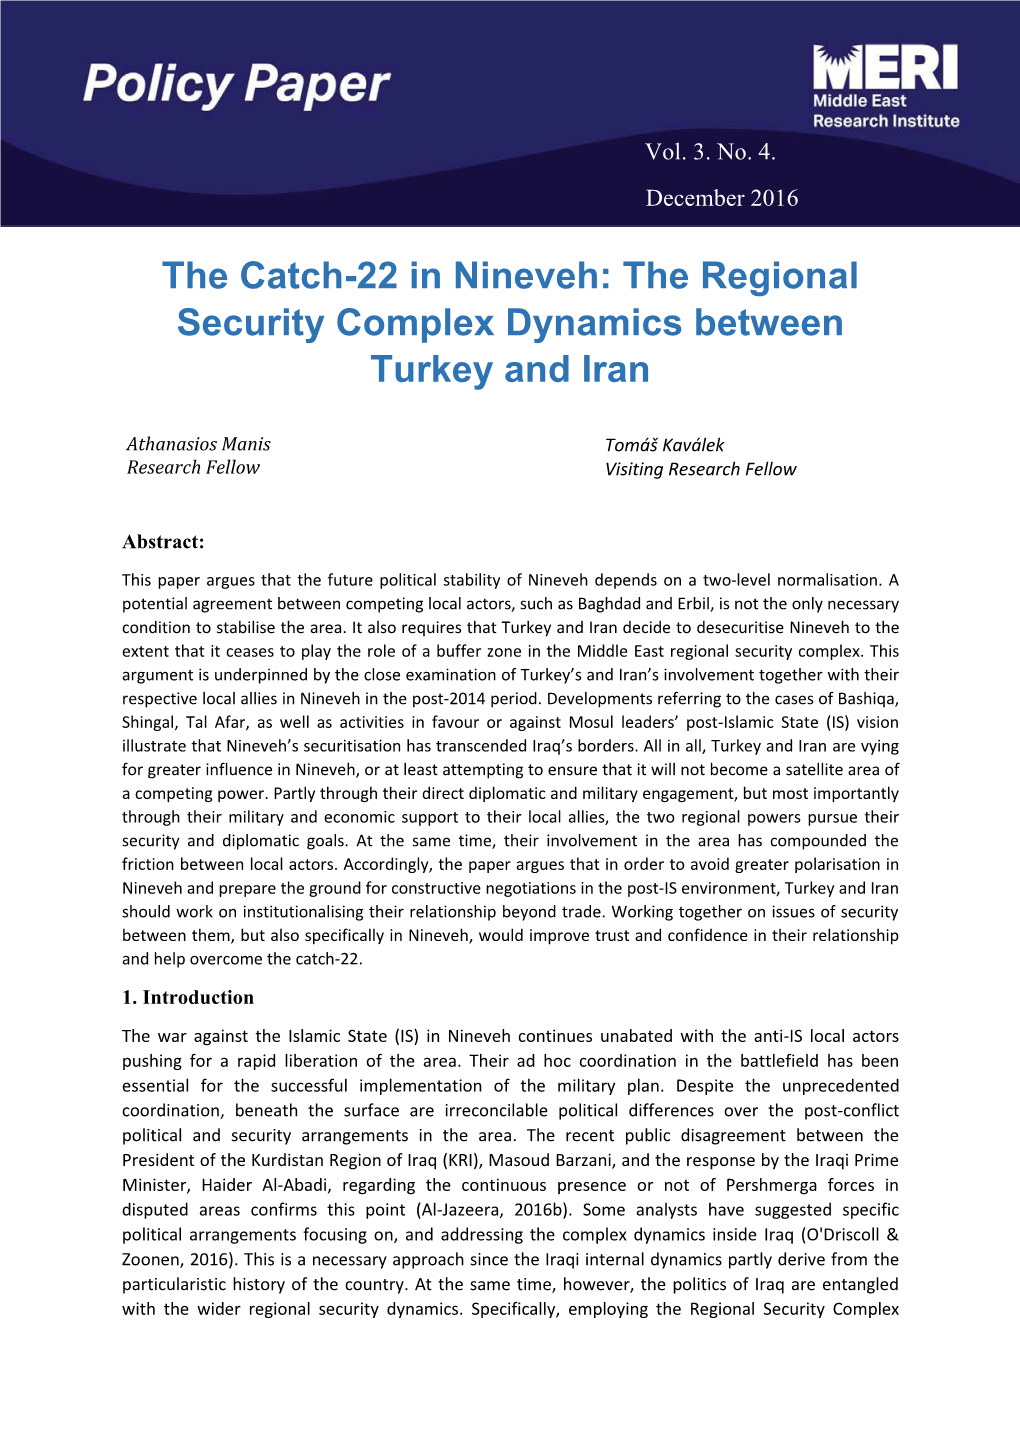 The Regional Security Complex Dynamics Between Turkey and Iran